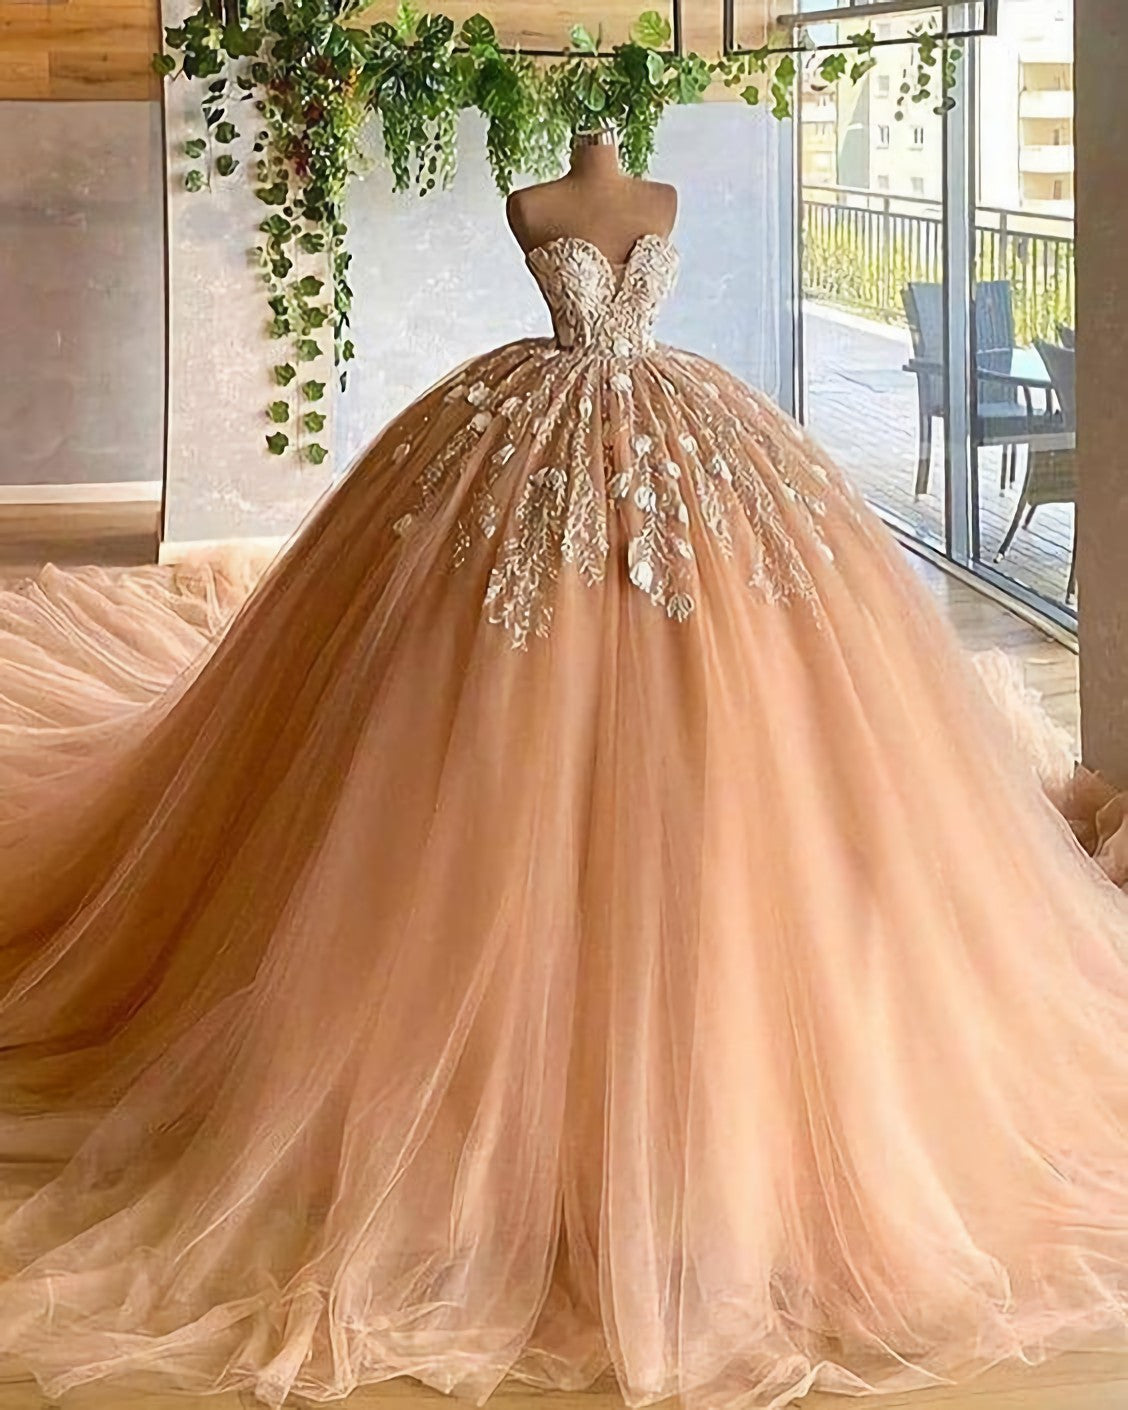 Prom Dress Beautiful, Applique Tulle Pleated Sweetheart Champagne Ball Gown Evening Dress